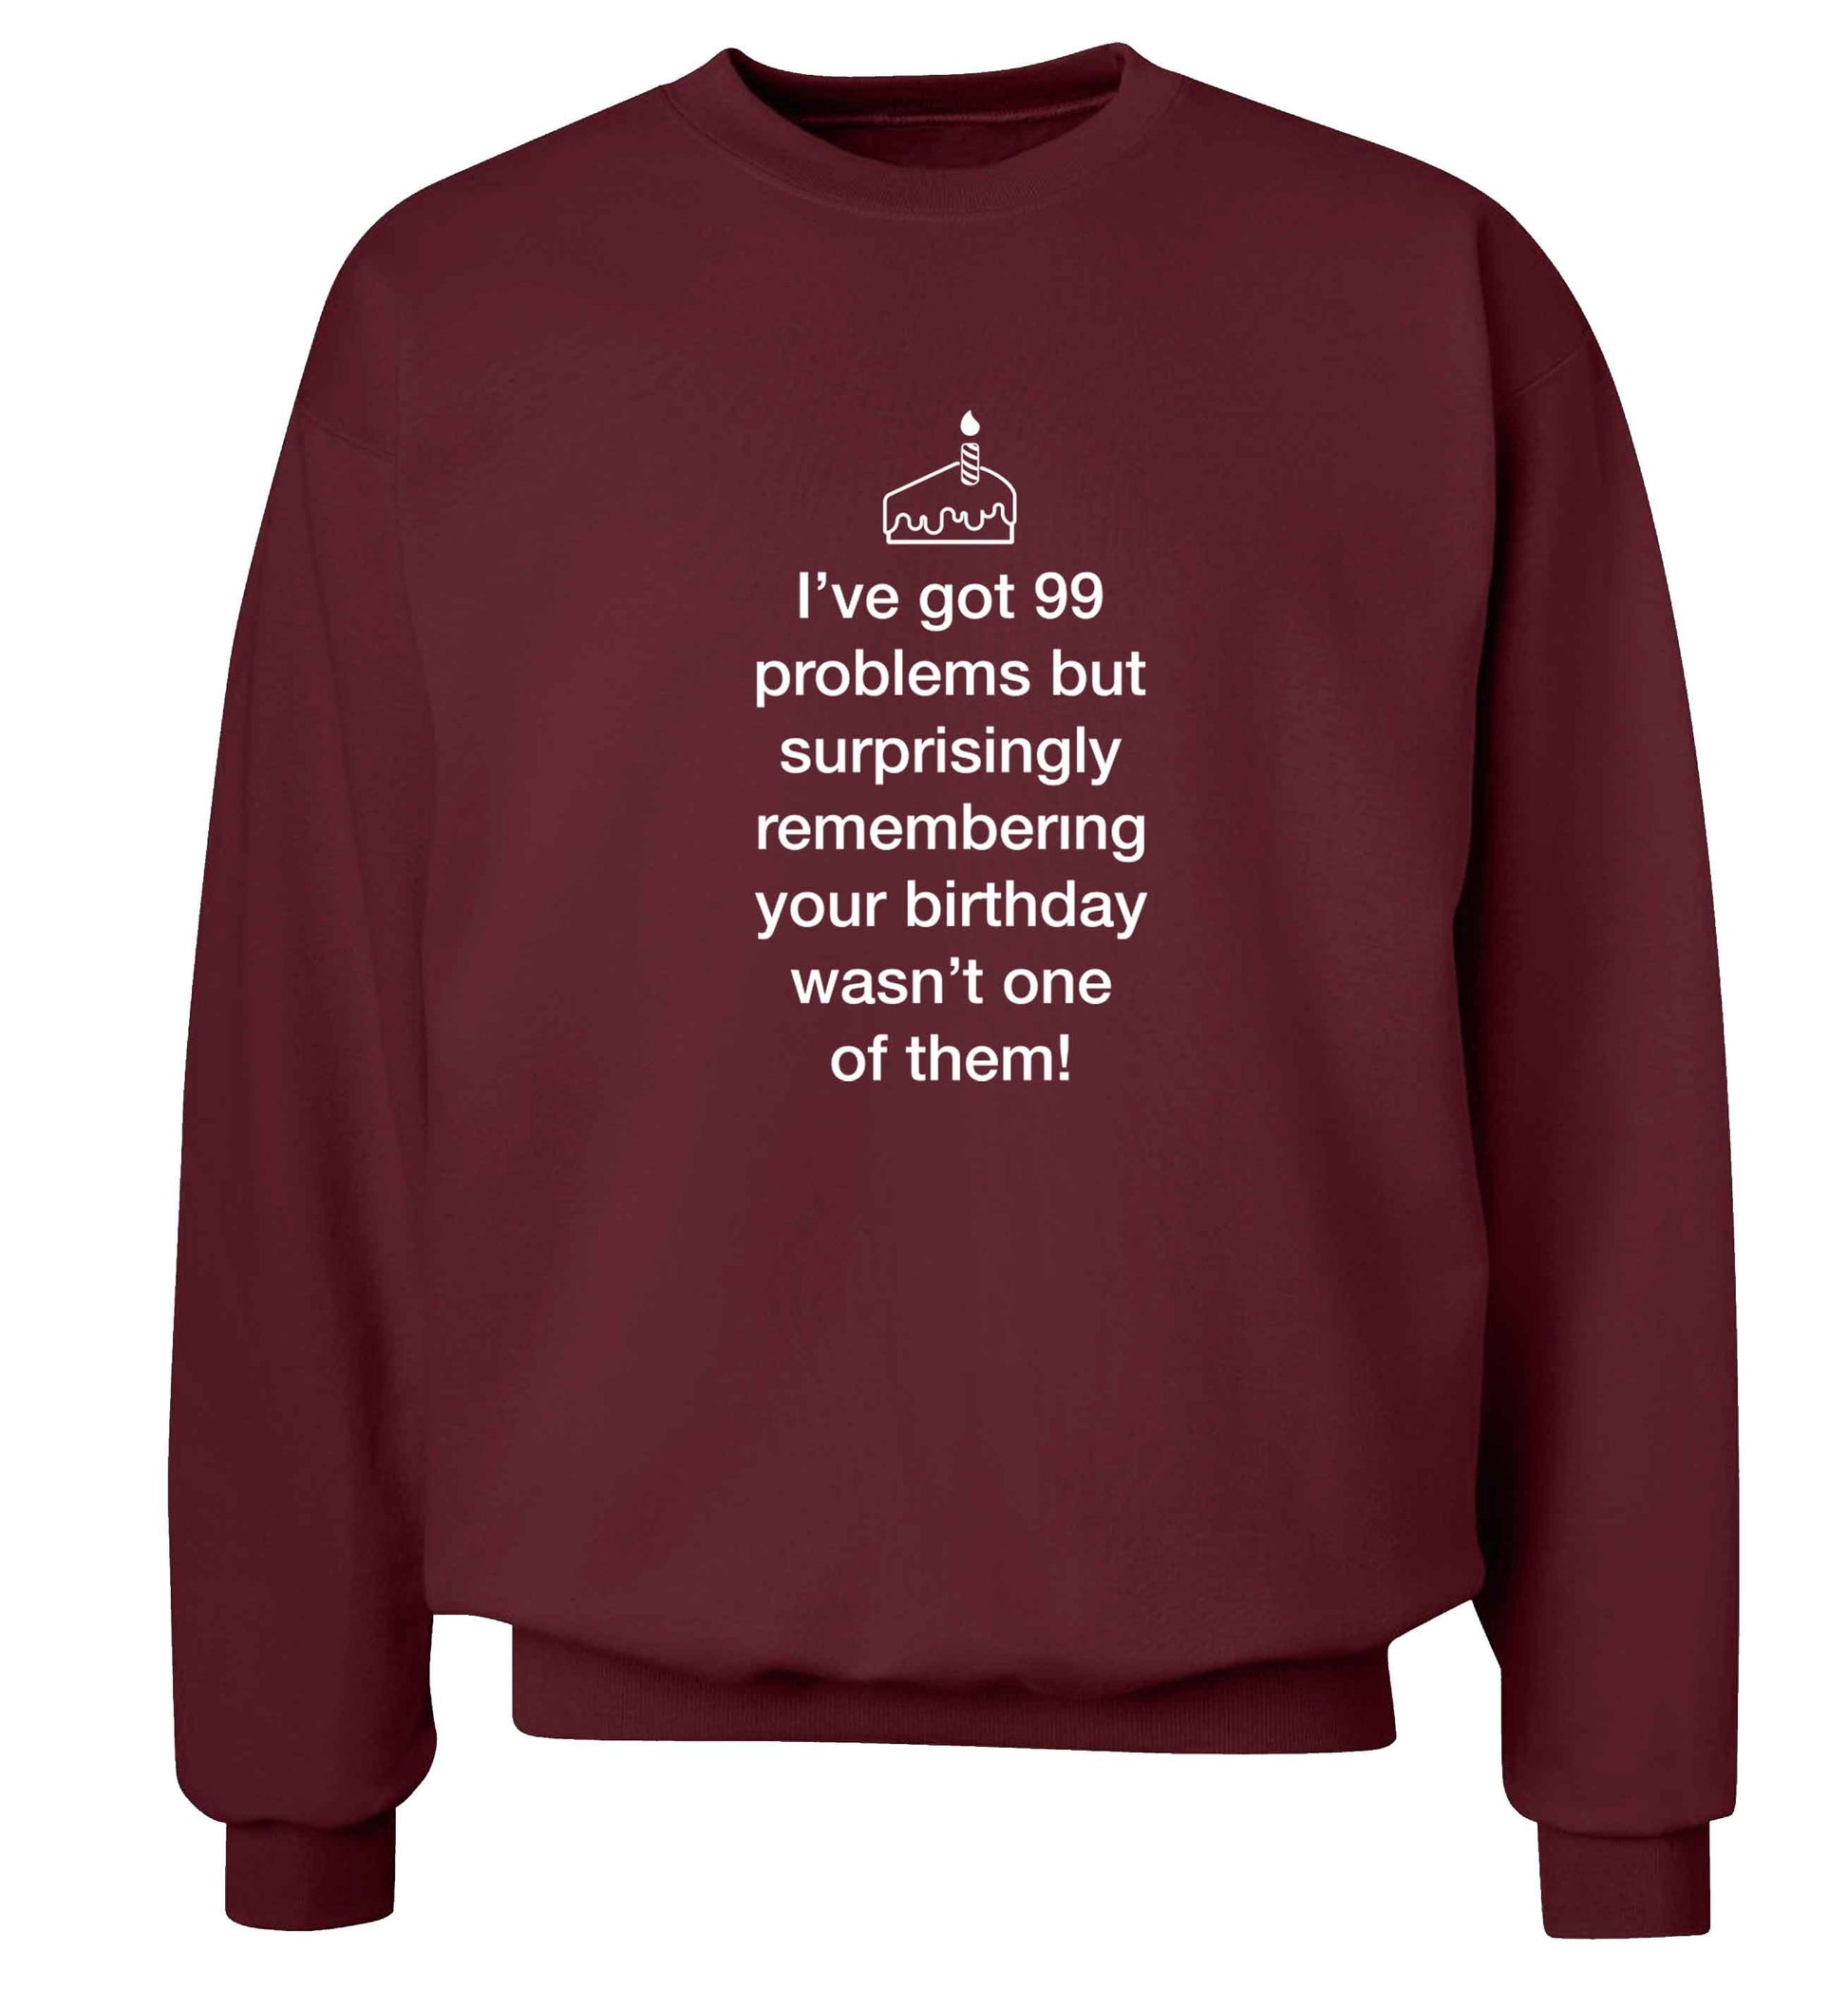 I've got 99 problems but surprisingly remembering your birthday wasn't one of them! adult's unisex maroon sweater 2XL